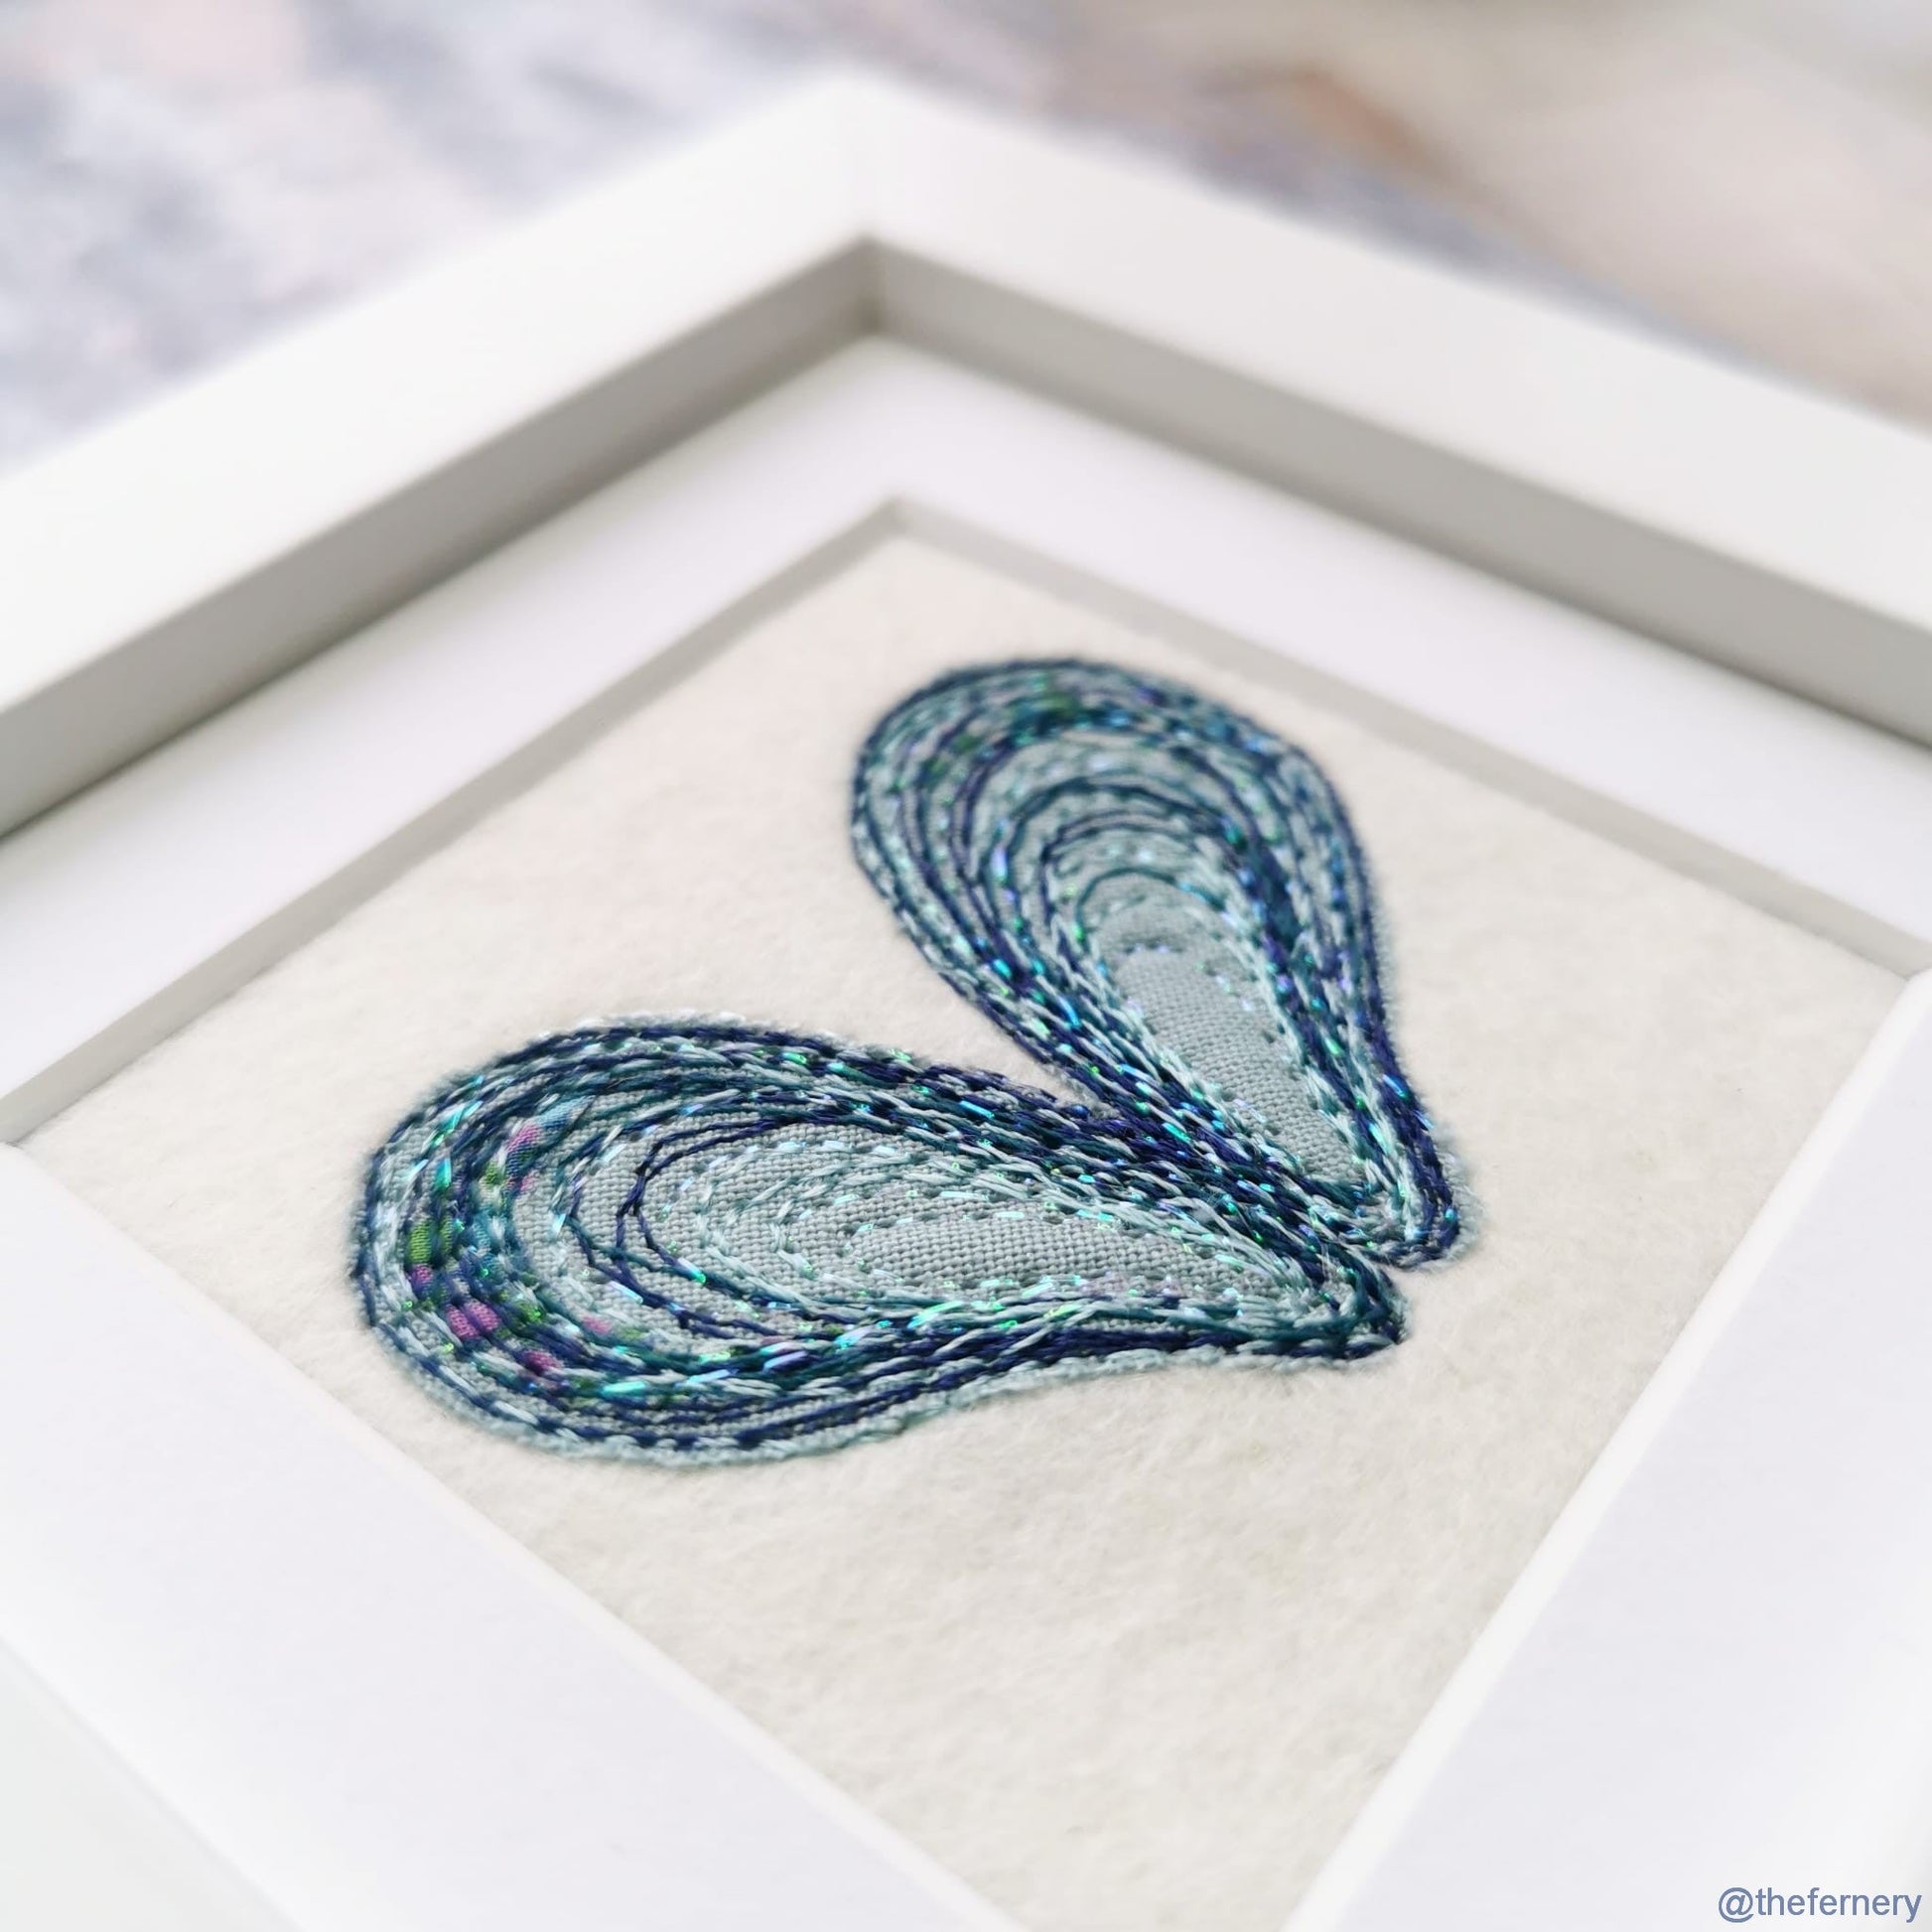 Decoration - Framed Stitched Mussel Heart